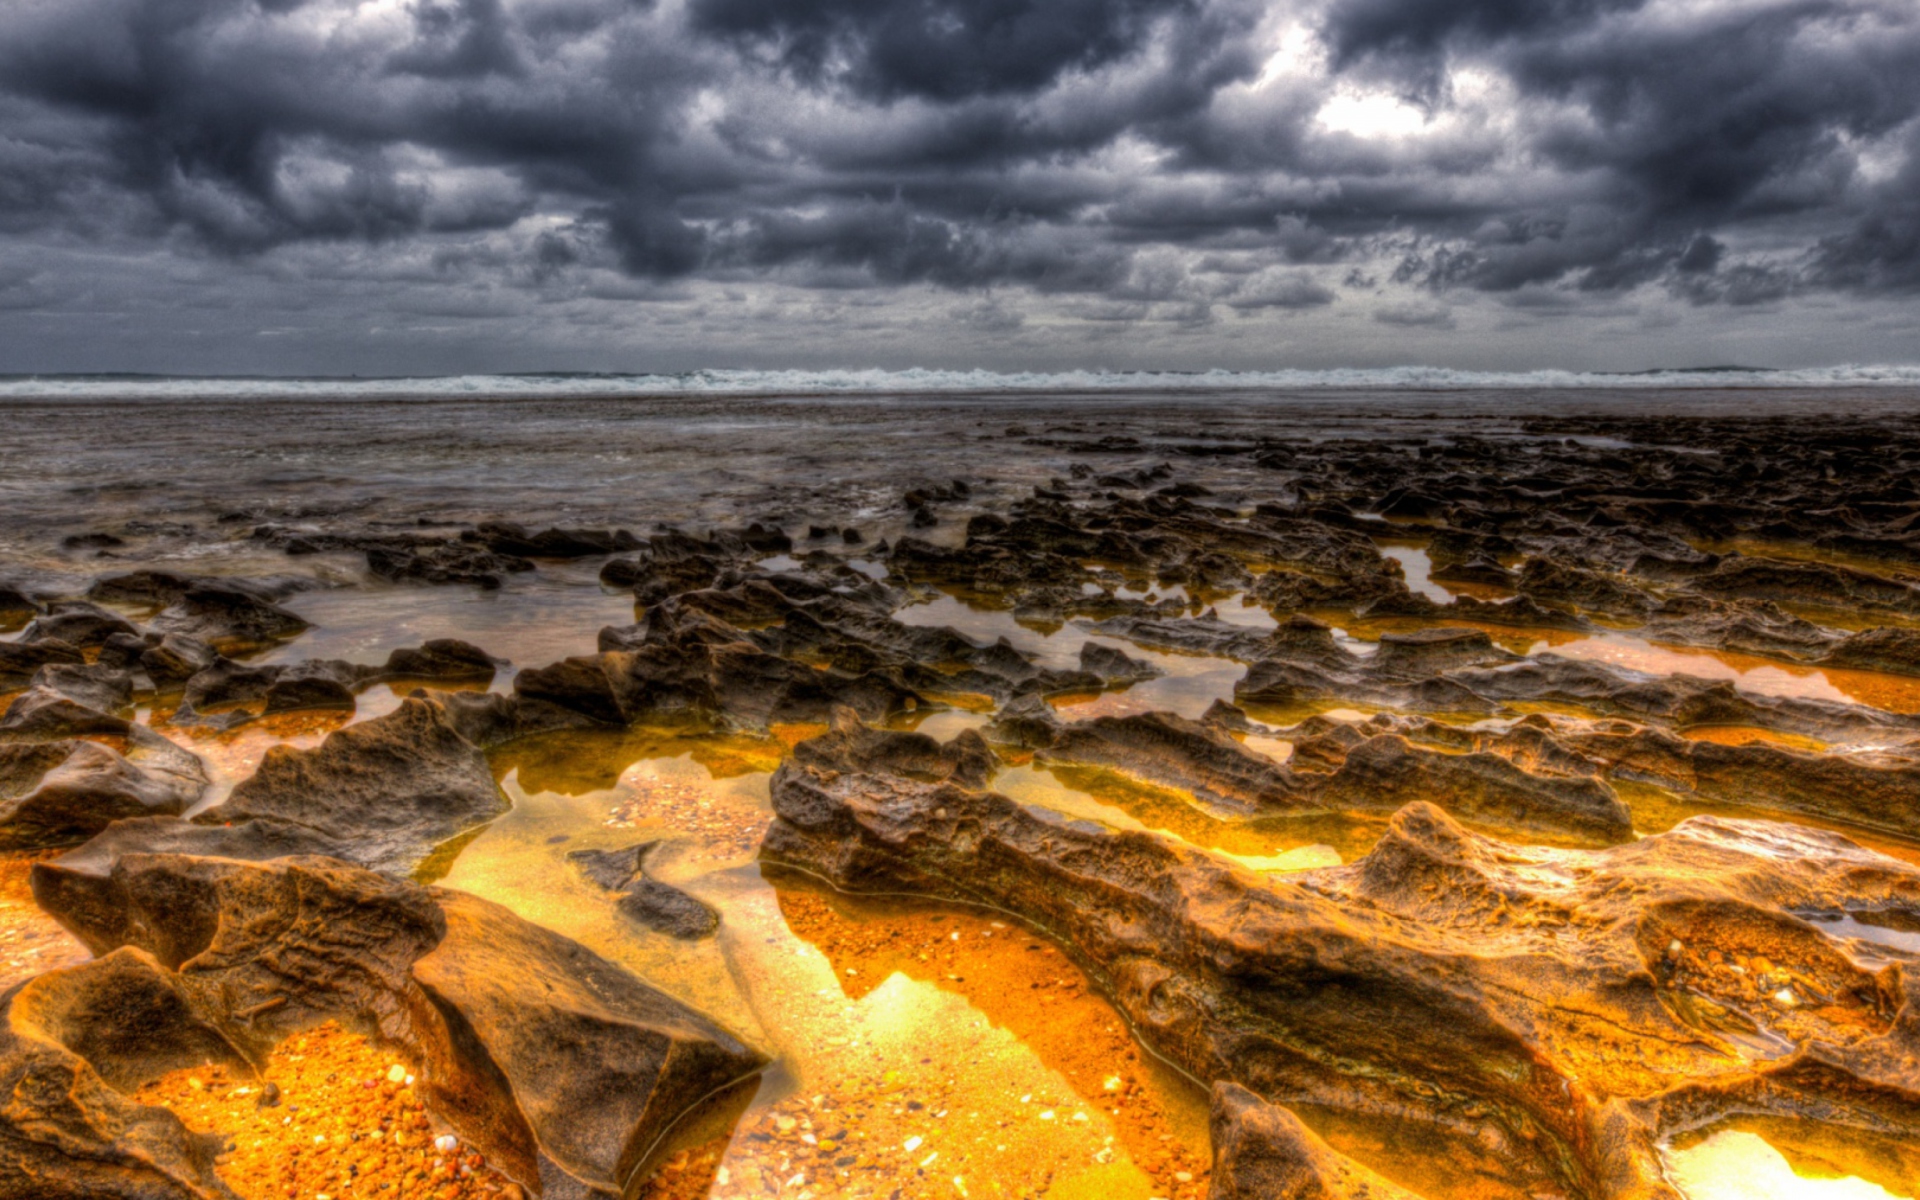 Hdr Dark Clouds And Gold Sand wallpaper 1920x1200